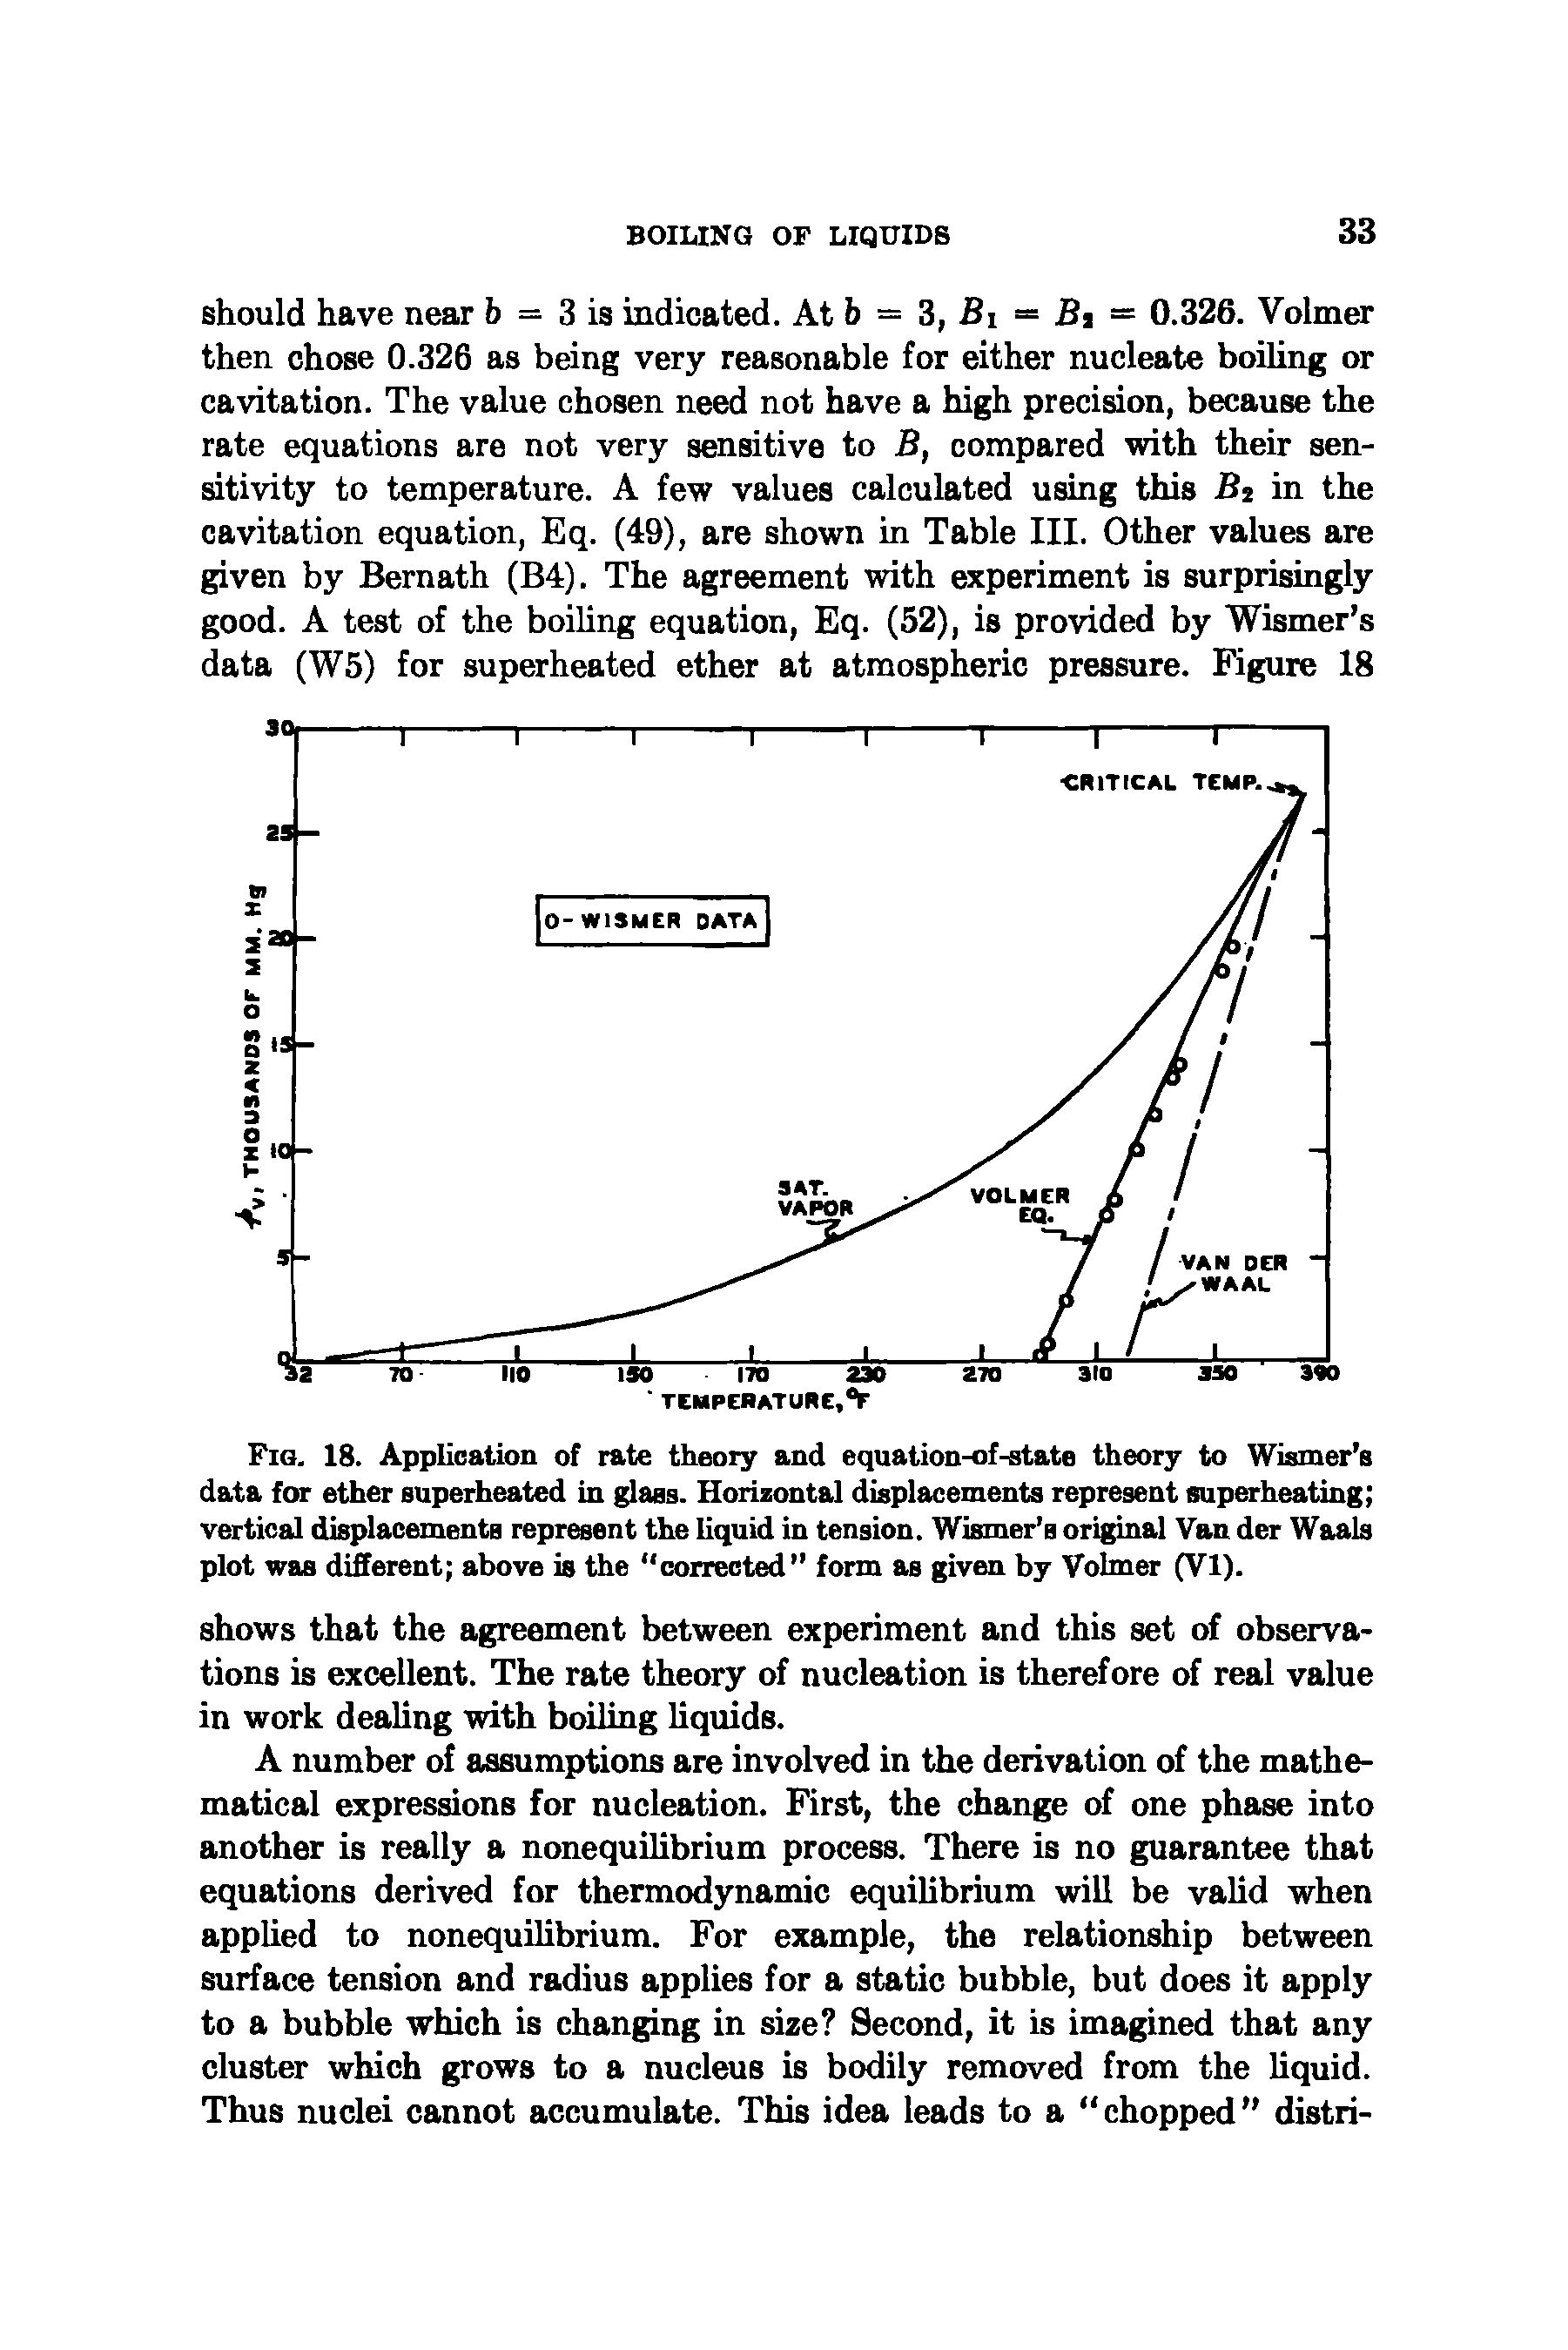 Fig. 18. Application of rate theory and equation-of-state theory to Wismer s data for ether superheated in glass. Horizontal displacements represent superheating vertical displacements represent the liquid in tension. Wismer s original Van der Waals plot was different above is the corrected form as given by Volmer (VI).